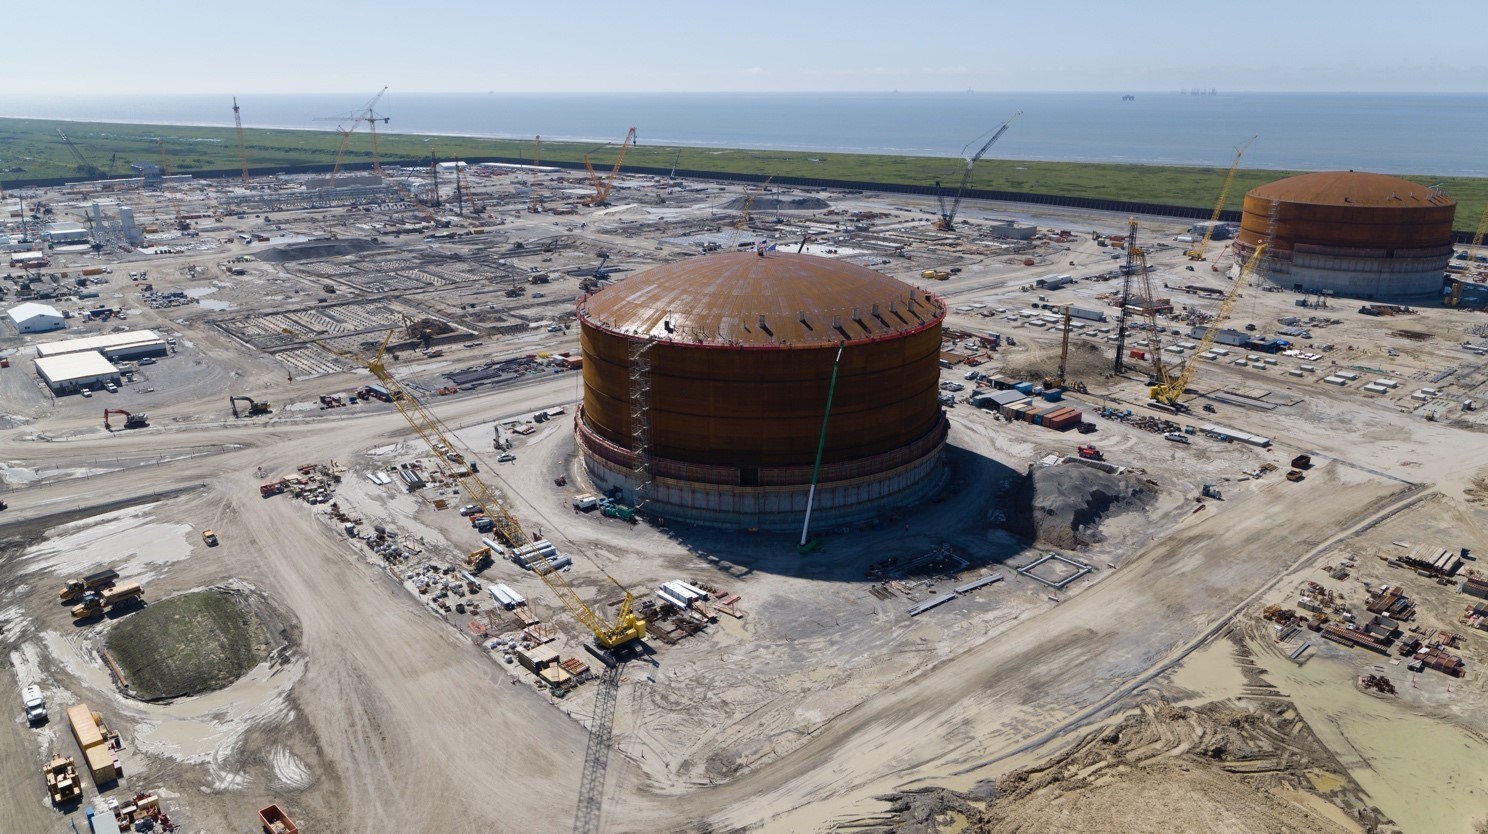 U.S. LNG export project developer Venture Global LNG said its Calcasieu LNG project sustained minimal impacts from Hurricane Laura.